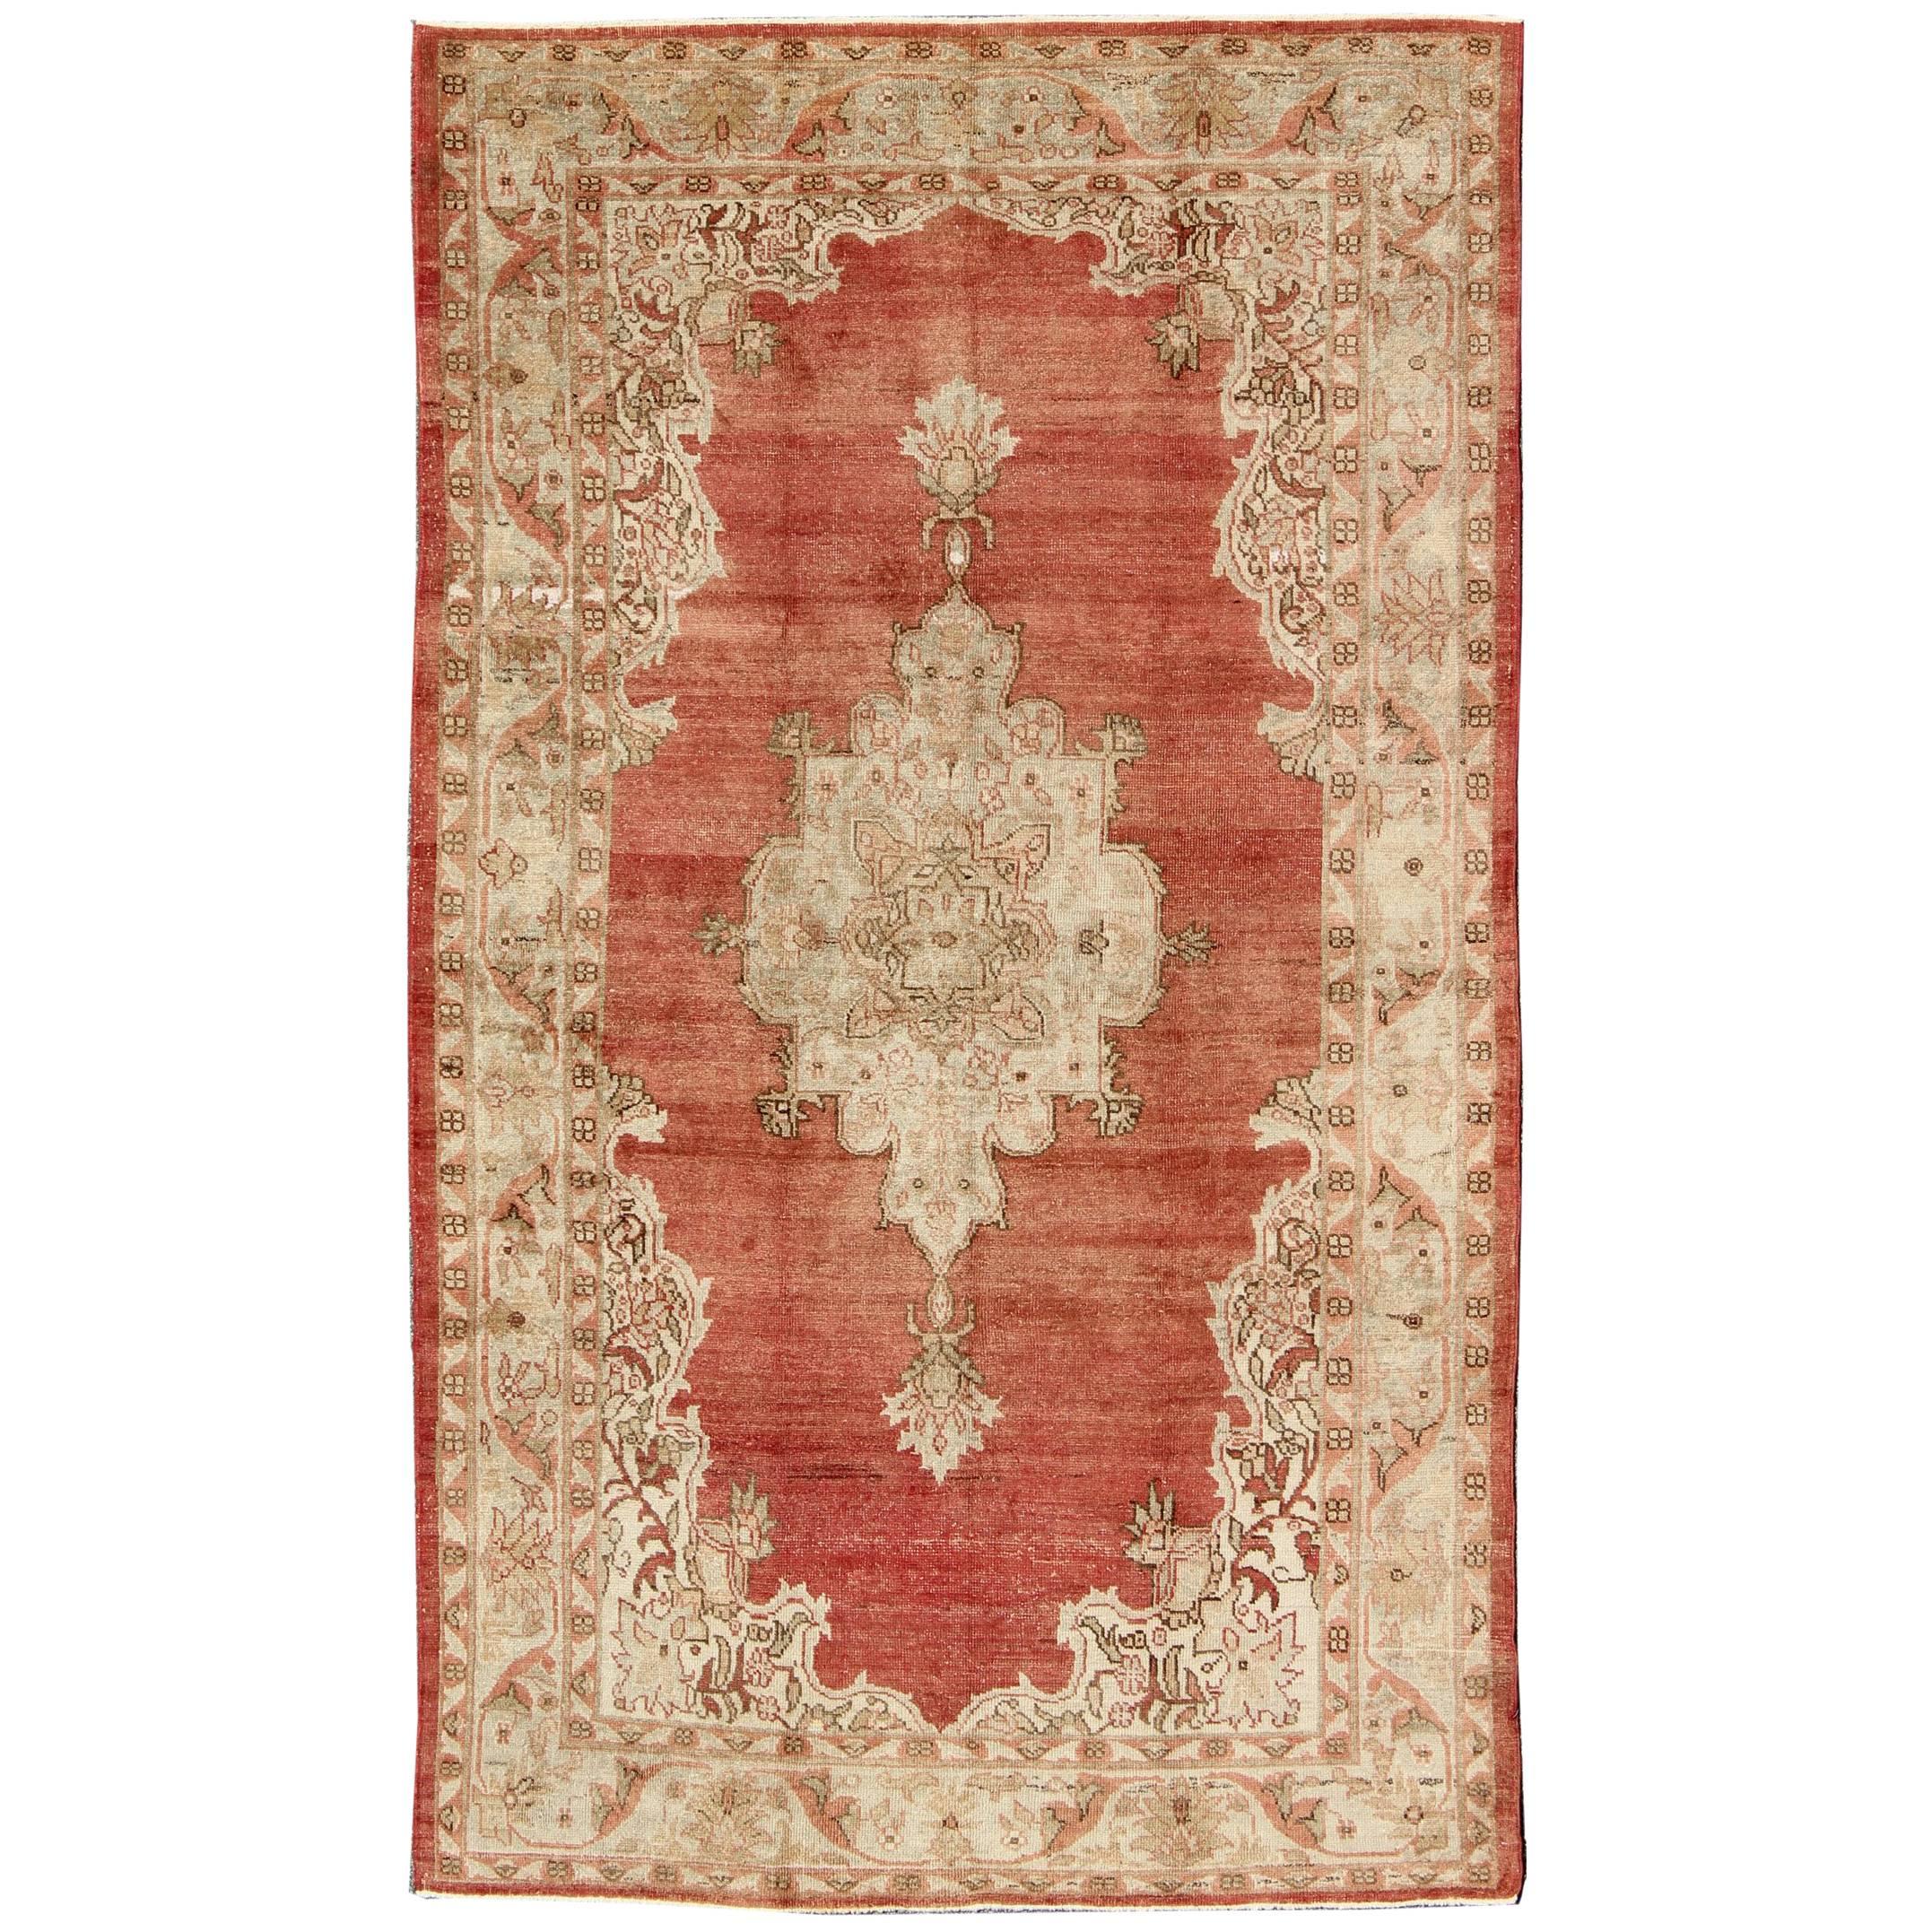 Antique Turkish Oushak Medallion Rug in Soft Red Background, Taupe & Pale Green